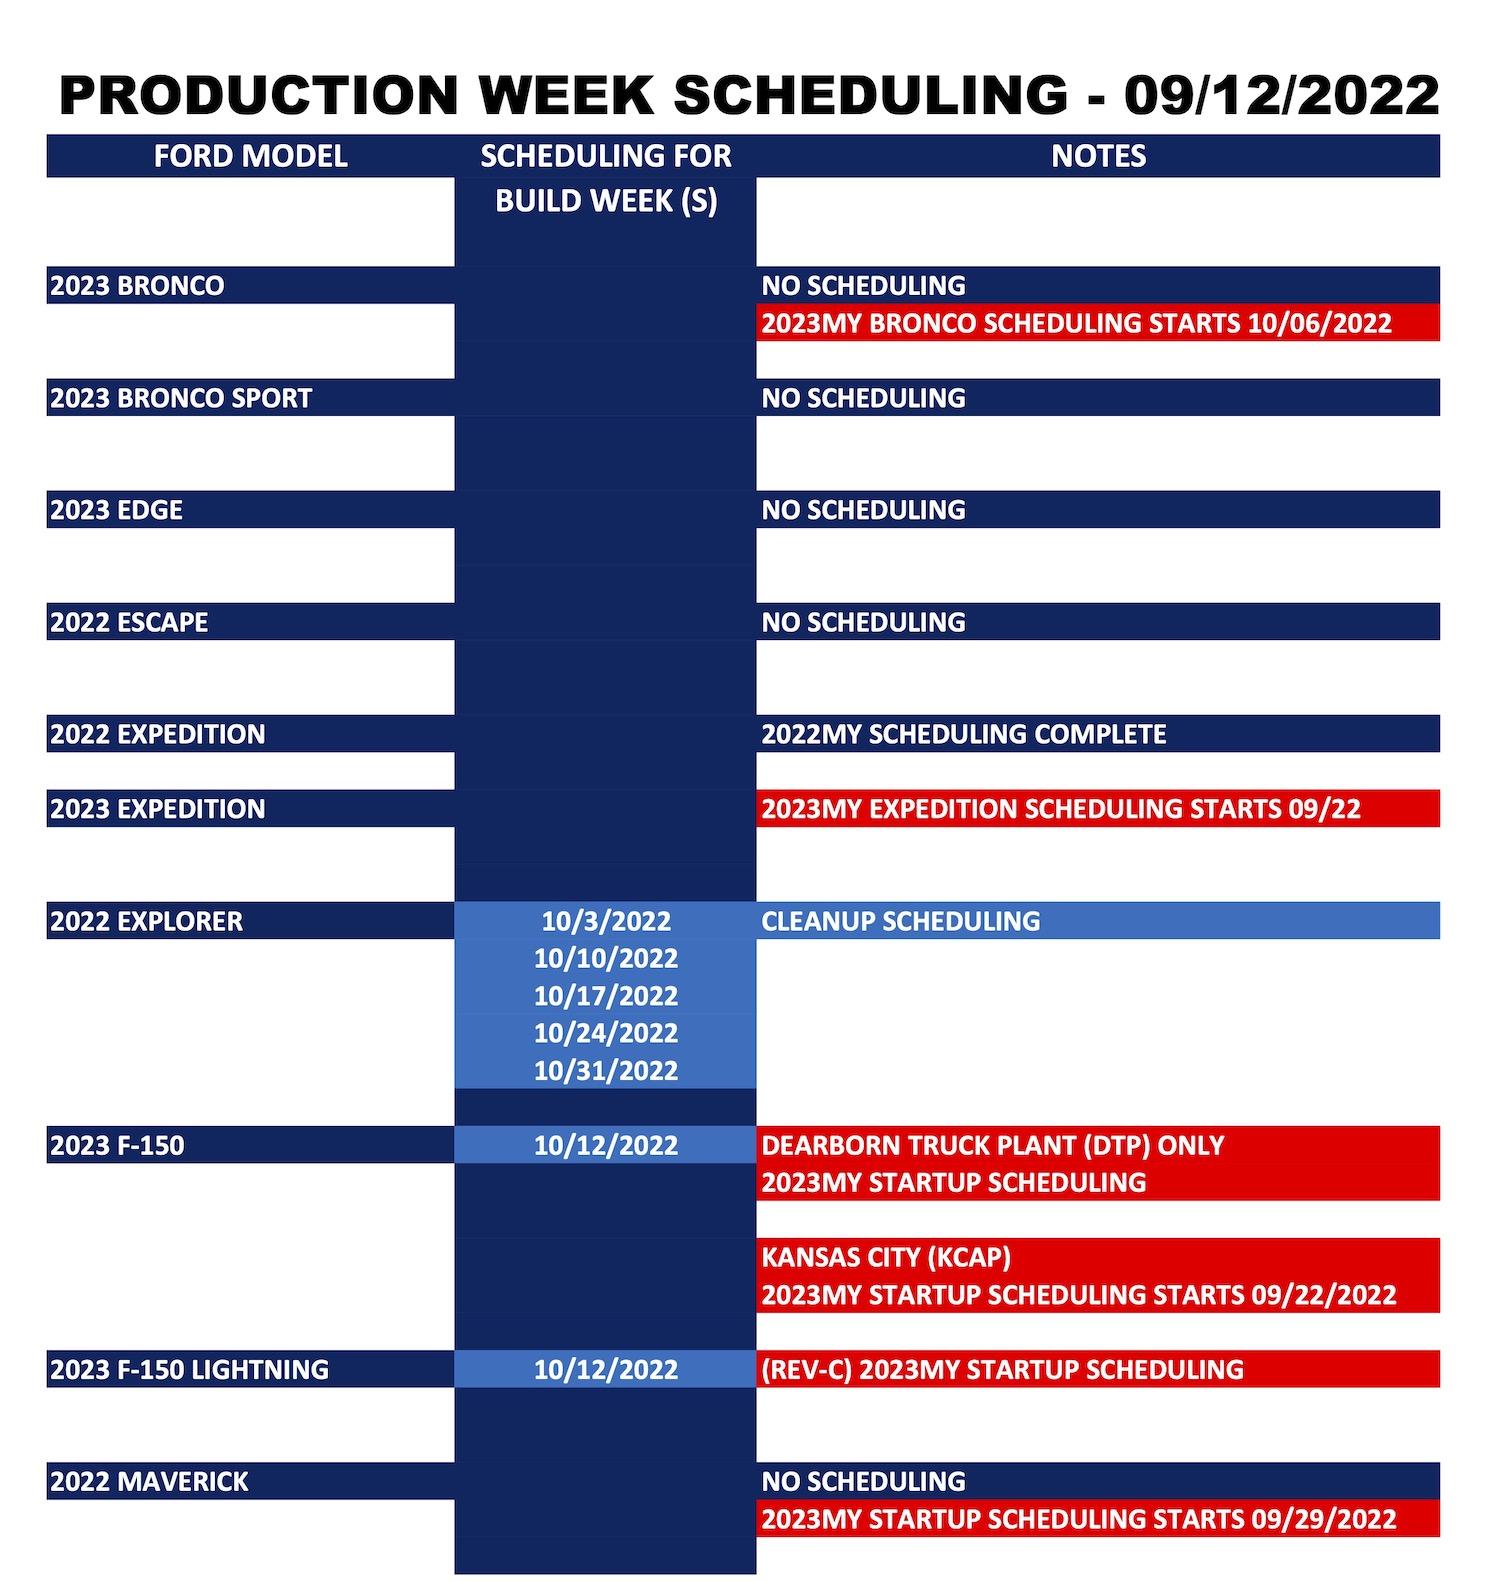 Ford F-150 Lightning ⏰ F-150 Lightning Scheduling This Week (9/12) For Build Week 10/12 Ford_Forums_Production Week Scheduling_2022-09-12_1